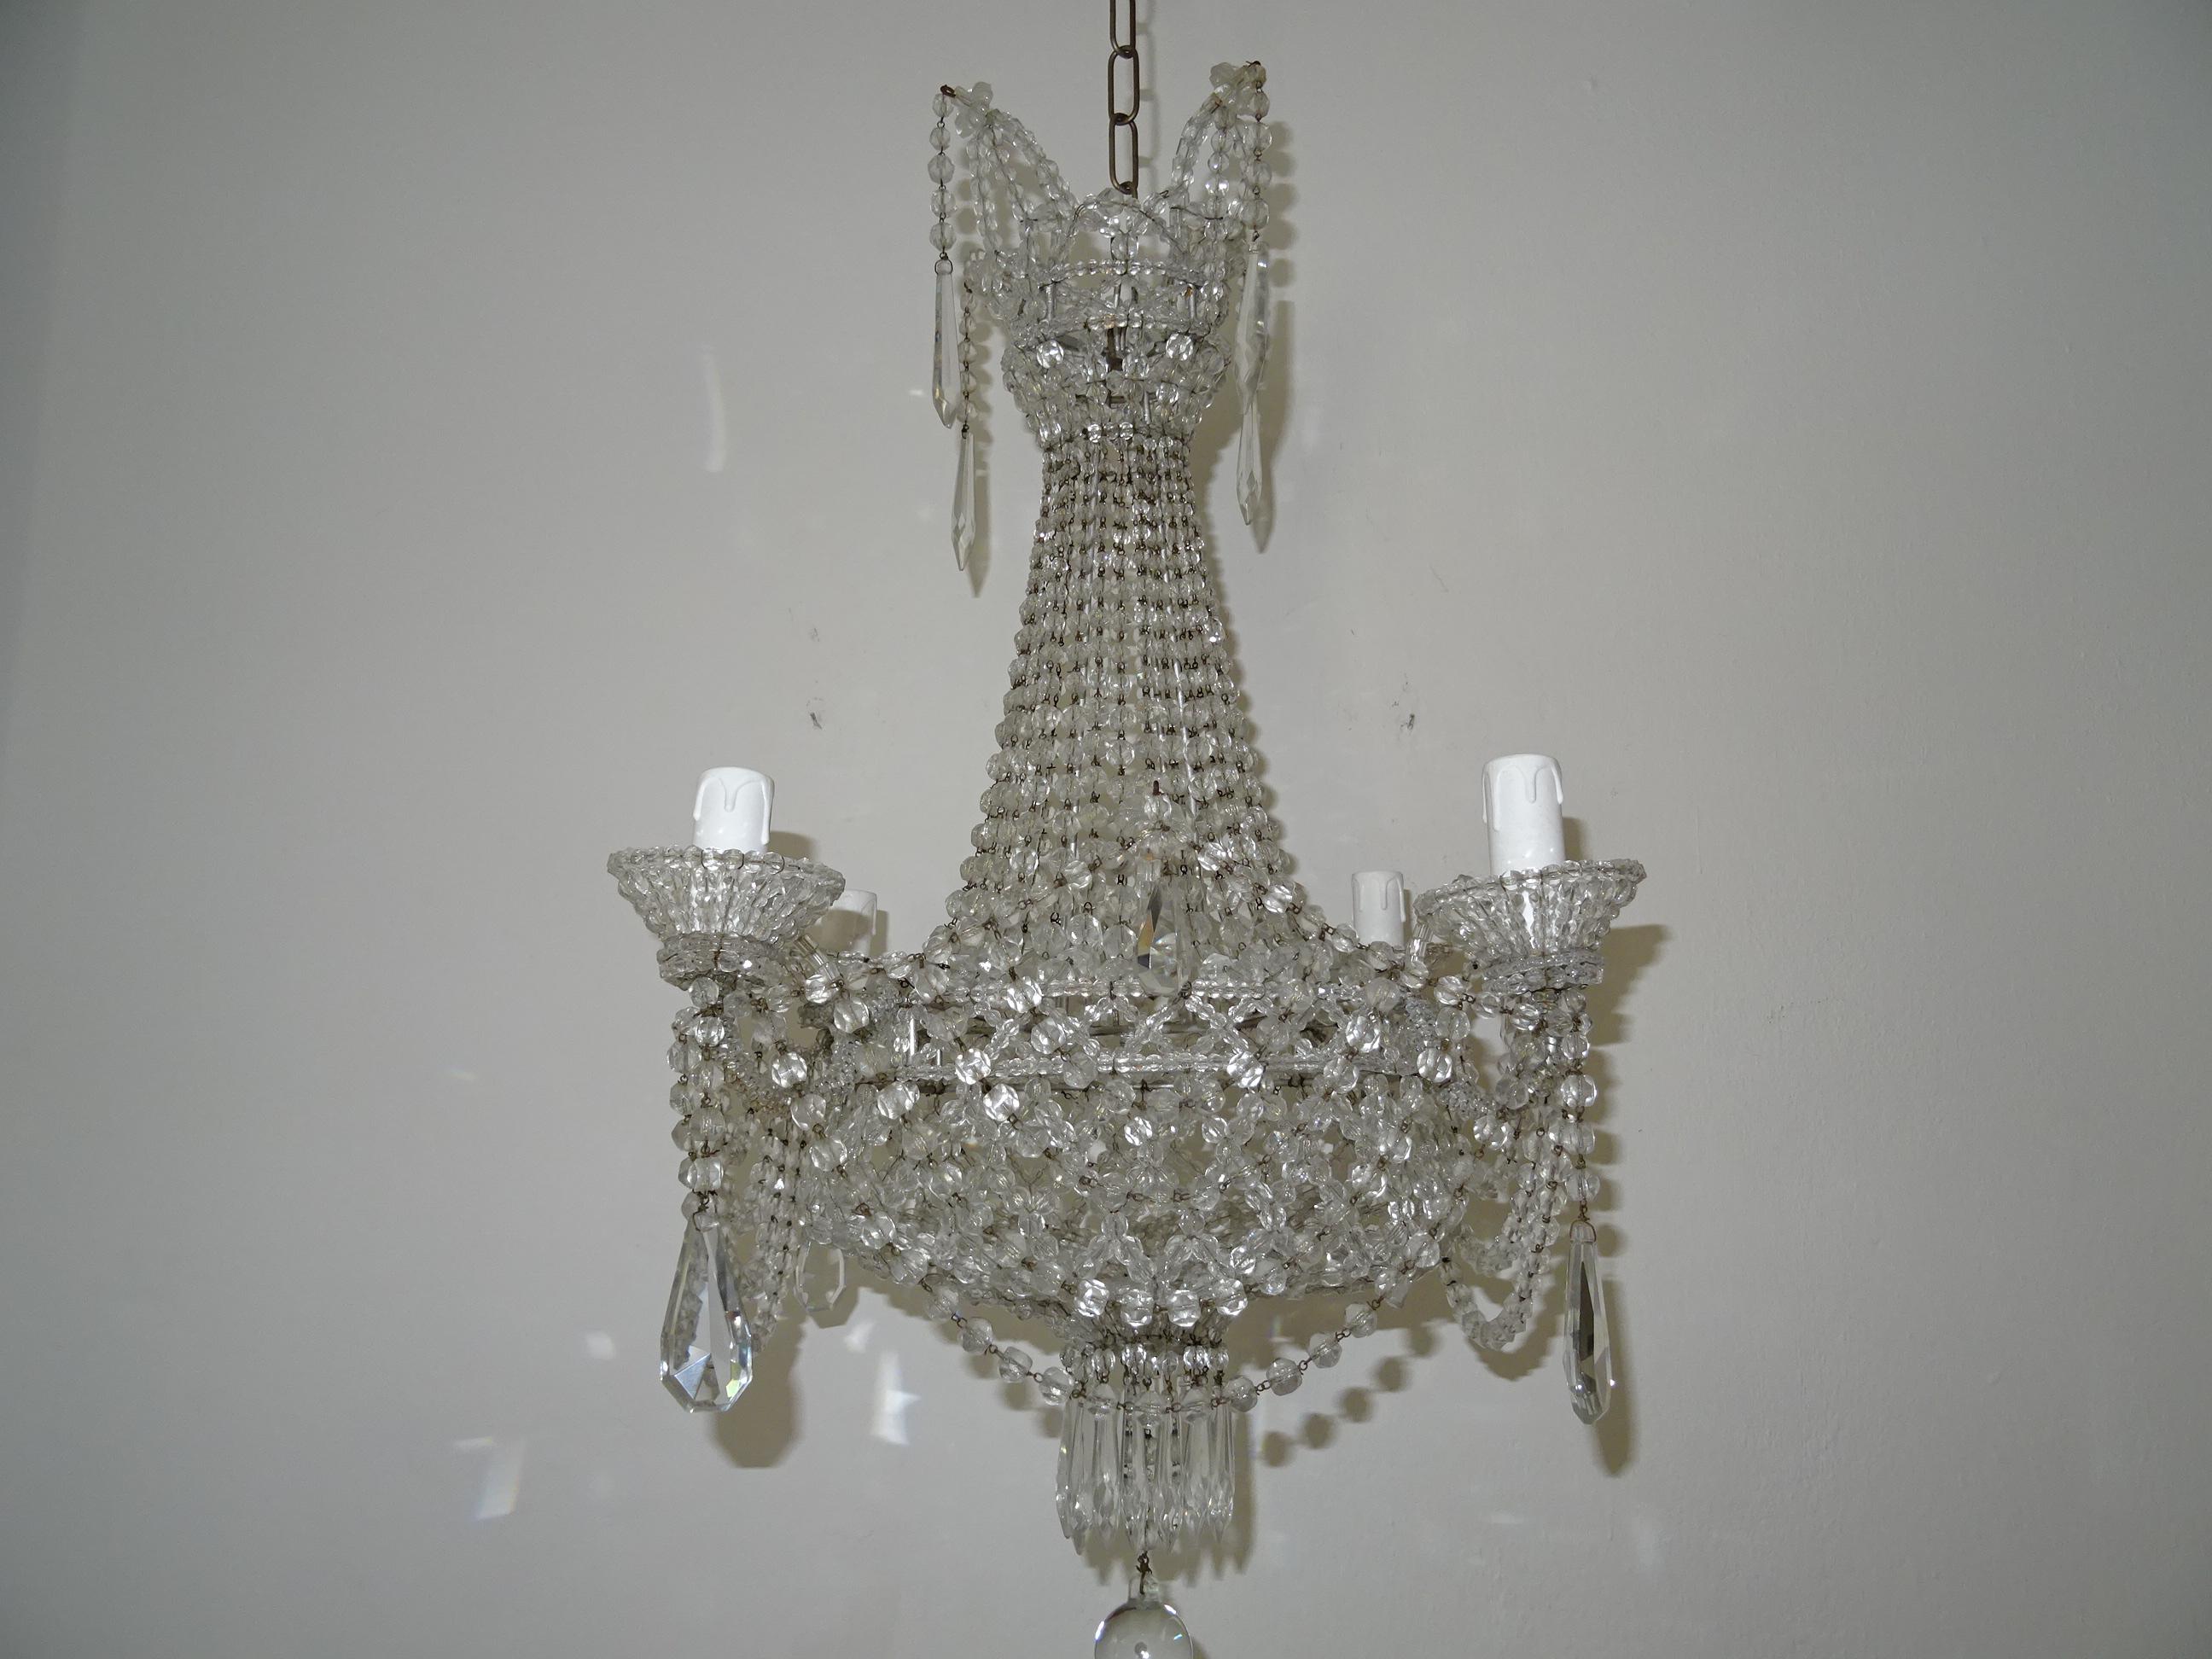 Housing four lights in beaded cups. Completely beaded with a beaded lace bottom. Adorning crystal prisms on top and in bottom. This chandelier has two widths... 19.5 and 14 inches. Adding another 17 inches of original chain and canopy. Will be